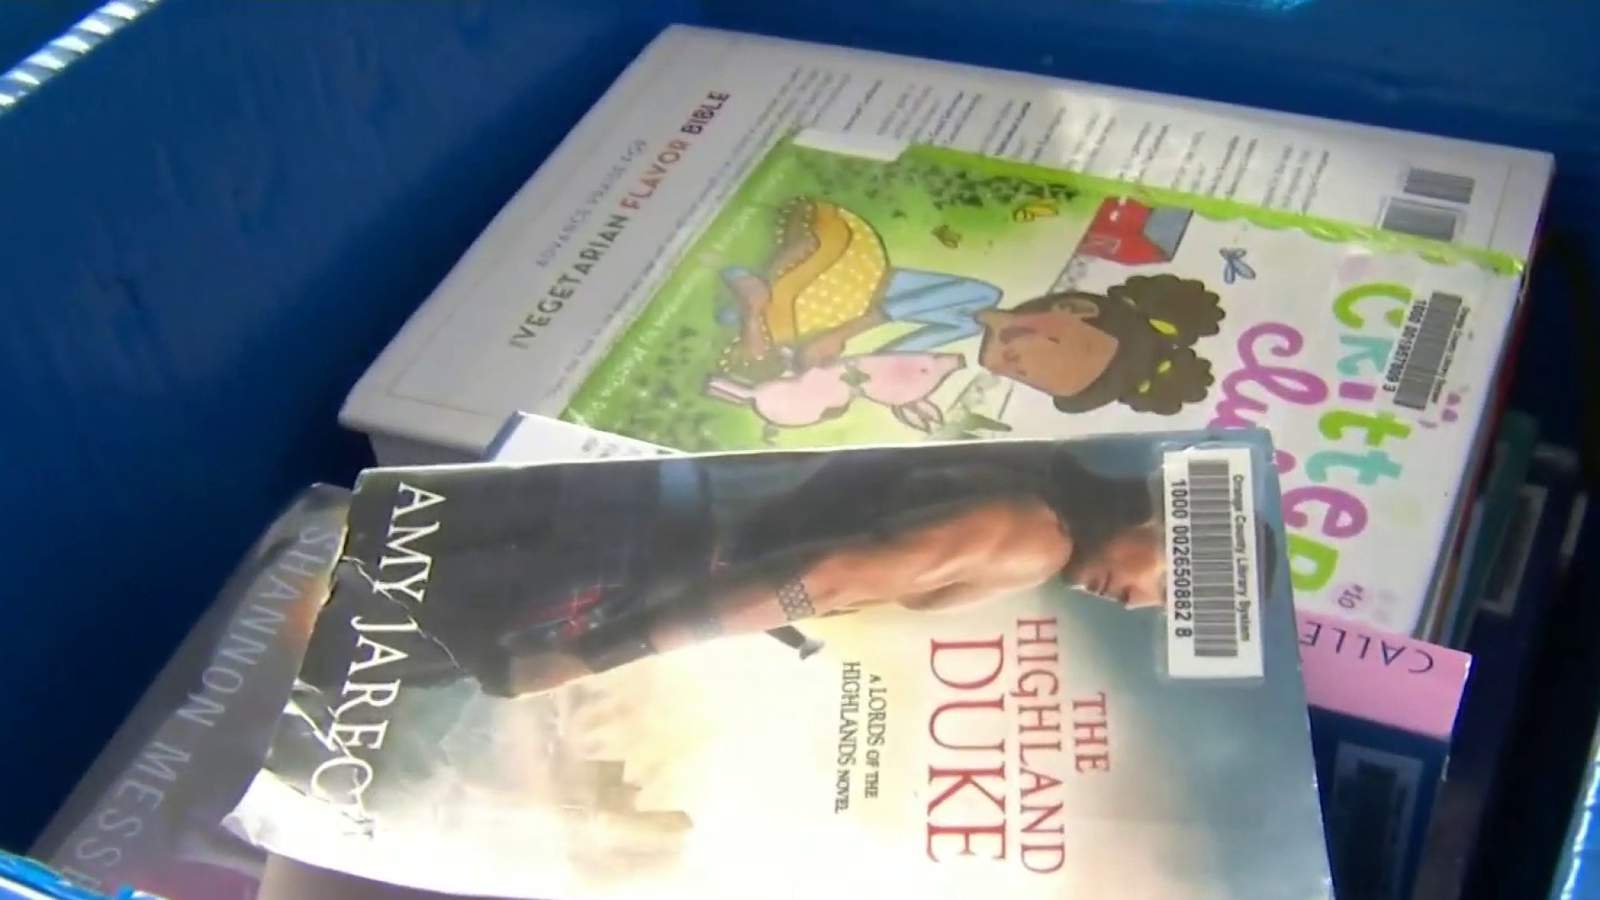 Orange County Library delivers books, movies and music for free